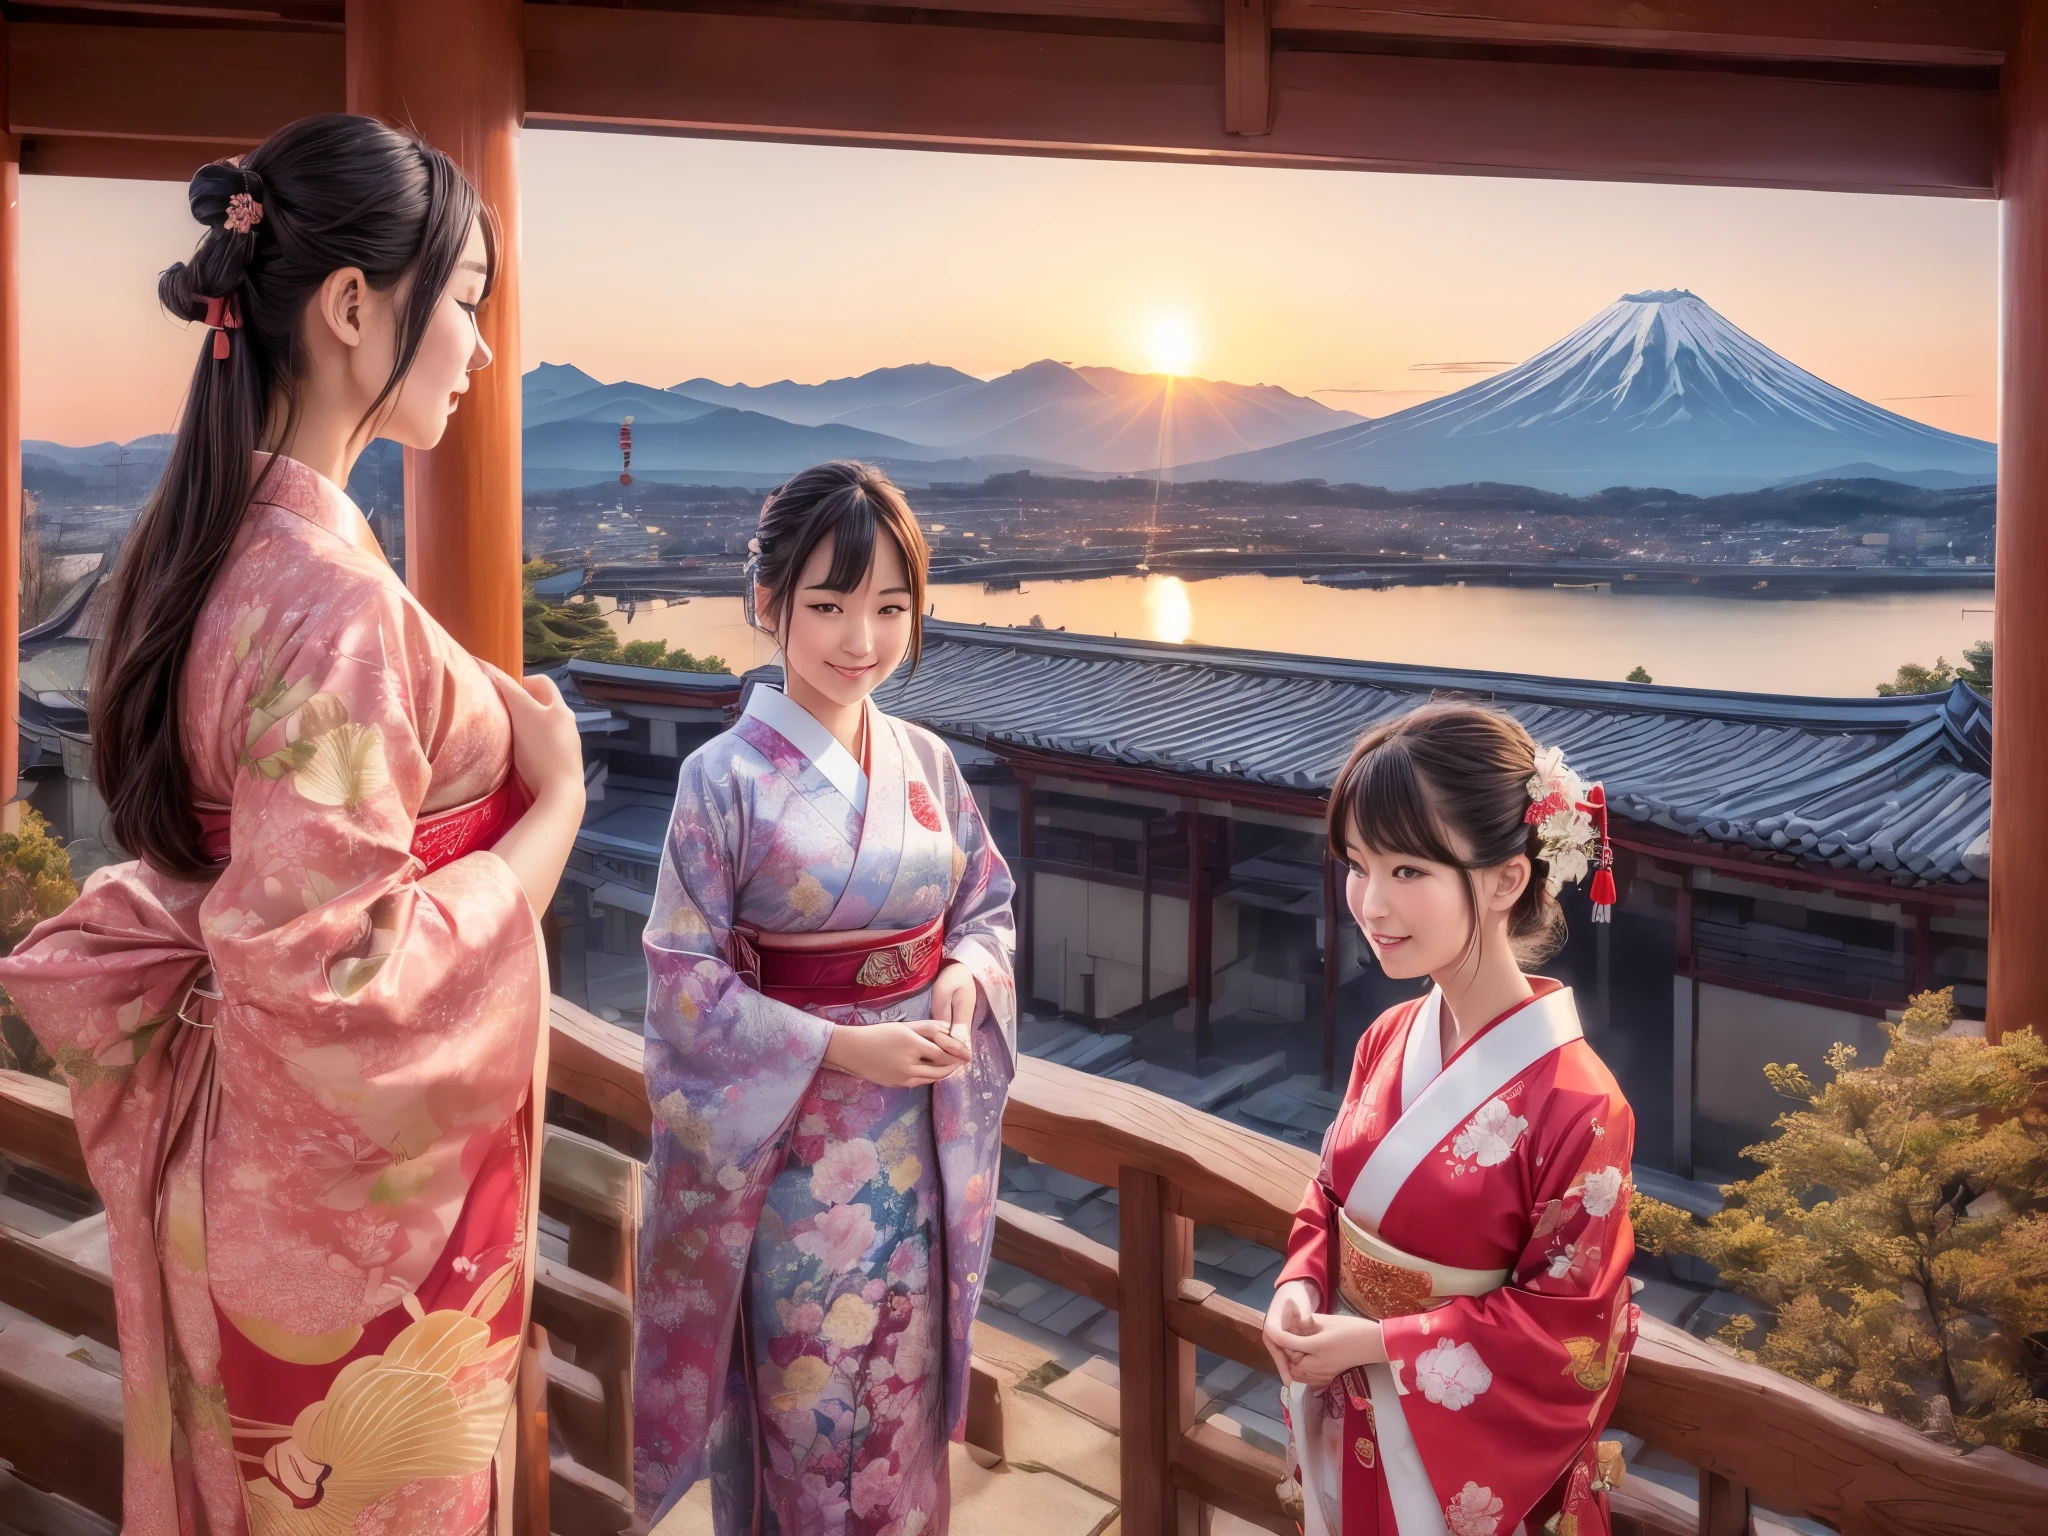 (best quality, realistic:1.37), traditional Japanese New Year's picture scroll, detailed illustration with vibrant colors, beautifully painted scenery, impressive depiction of Mount Fuji in the background, ively portrayal of people dressed in kimono celebrating the New Year, (carefully crafted depiction of a radiant sunrise on New Year's Day)